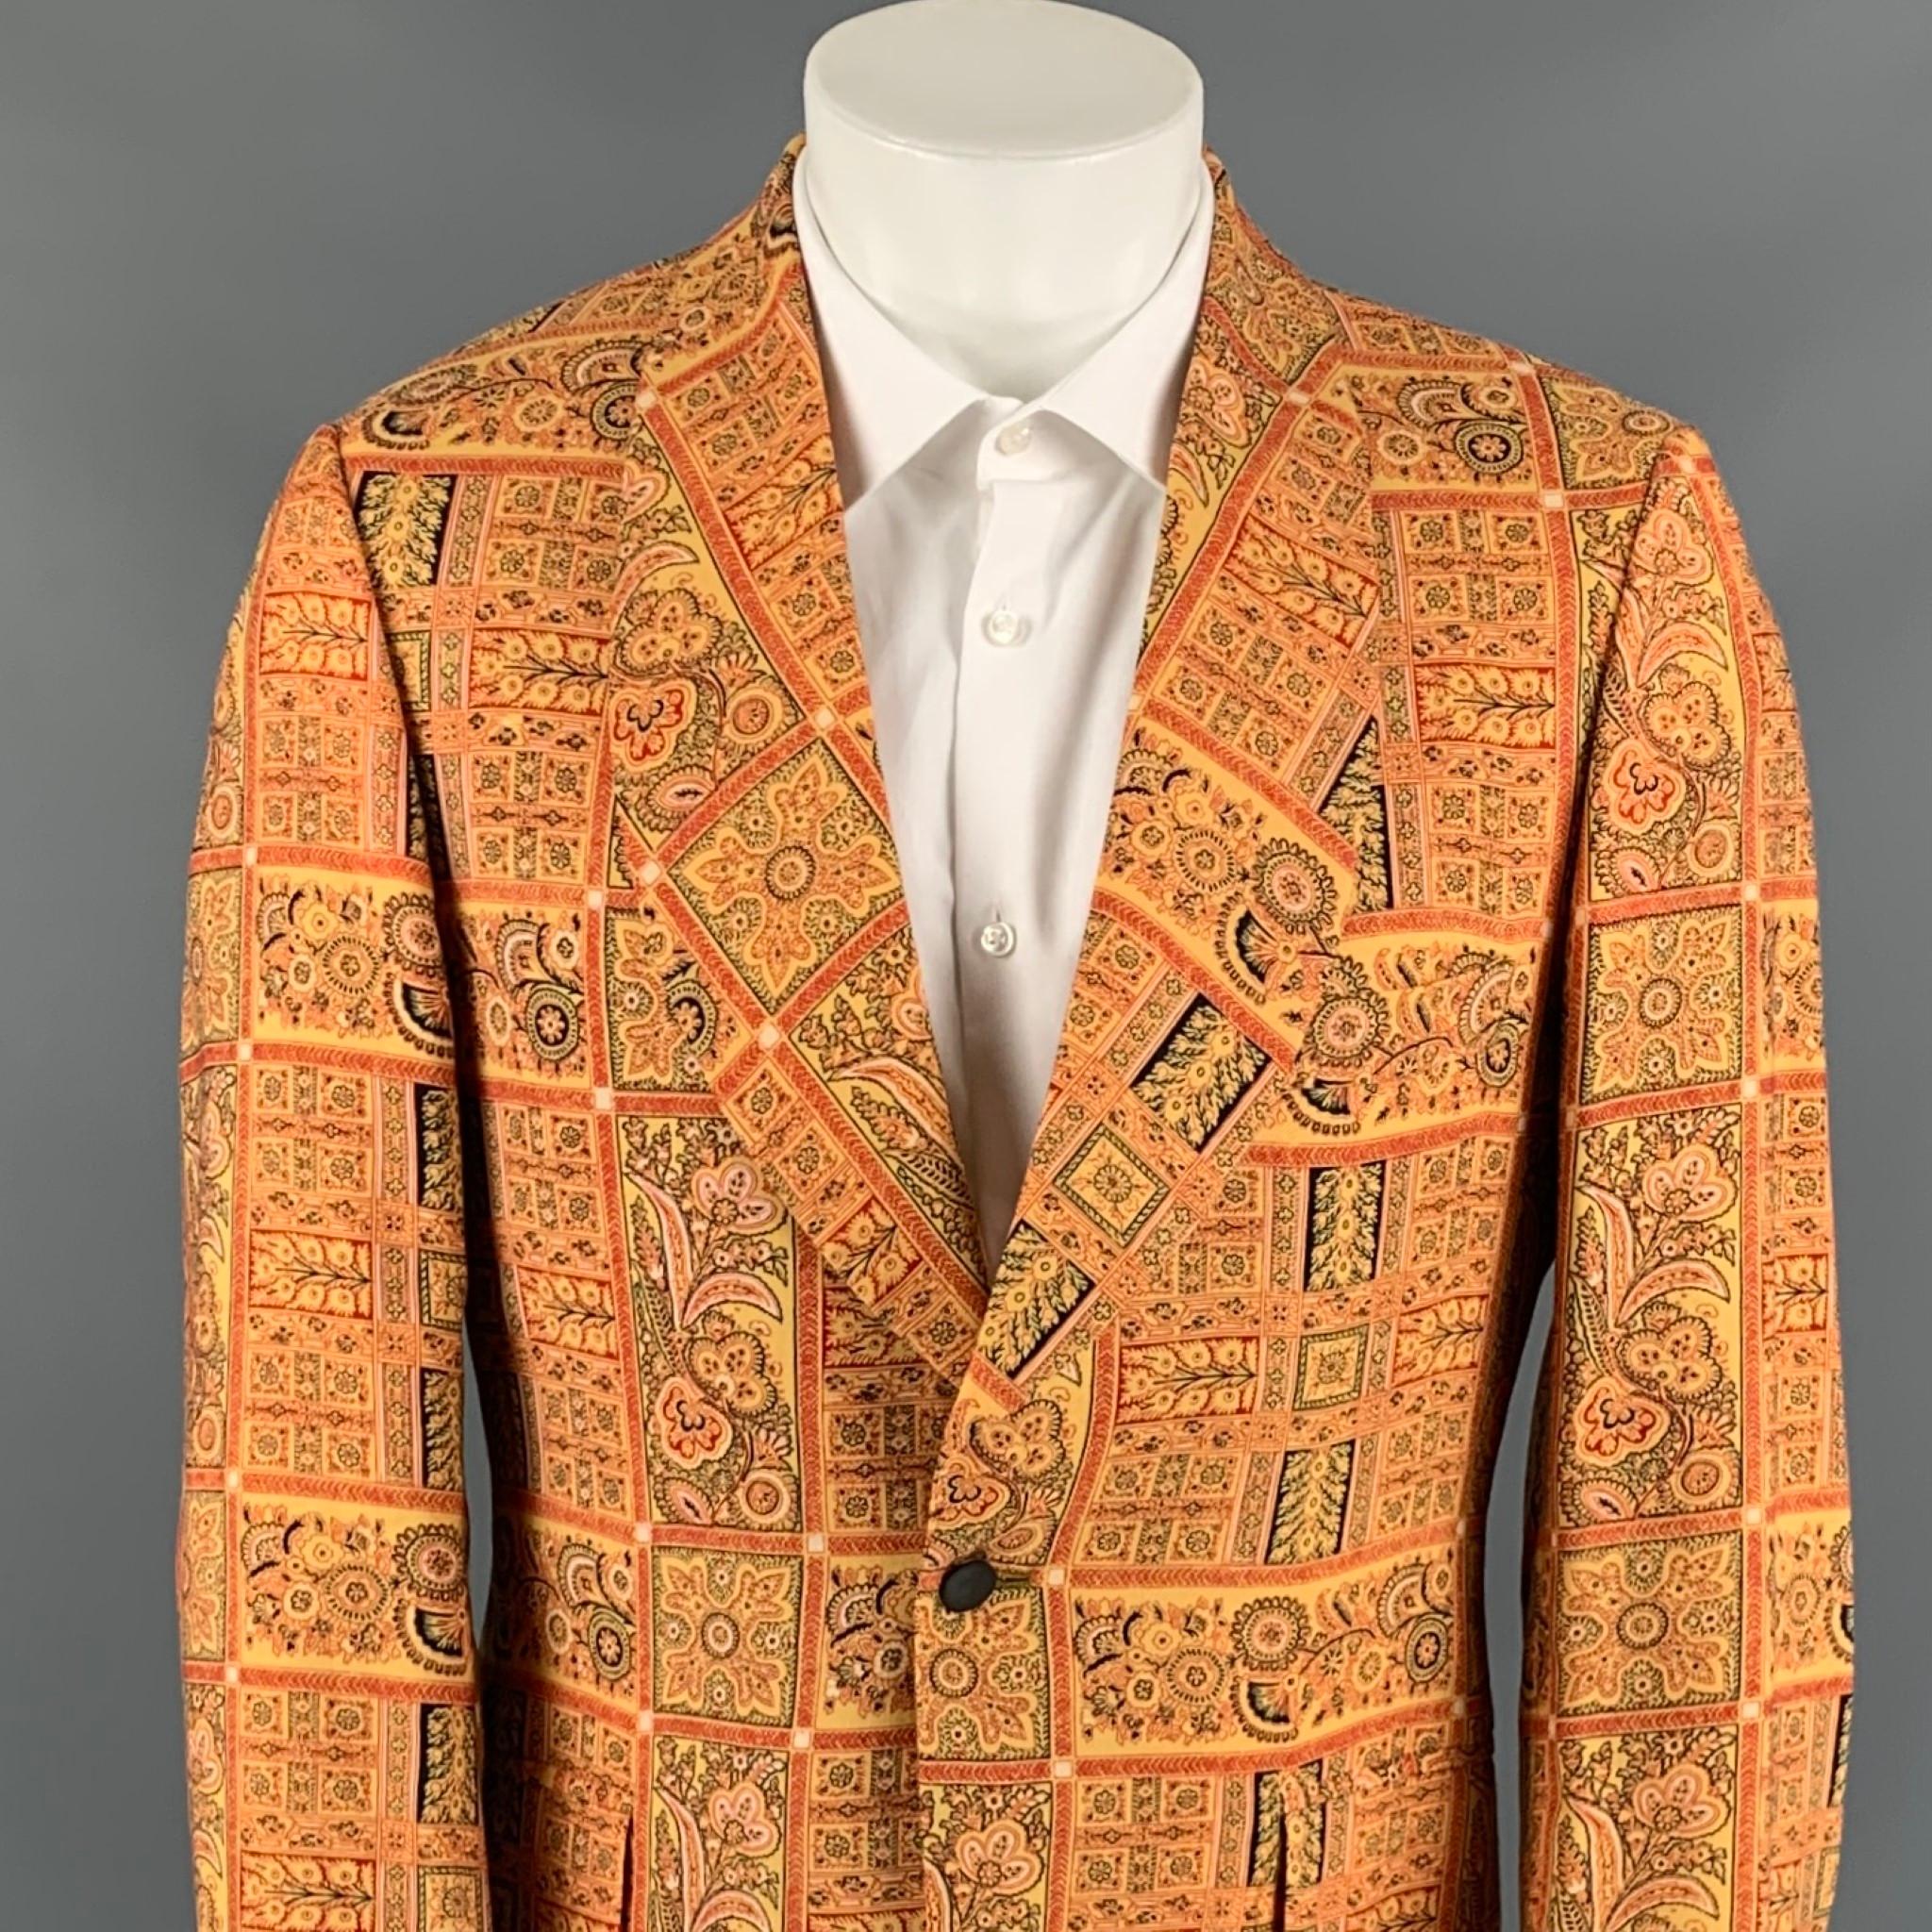 SAKS FIFTH AVENUE sport coat comes in a gold & red print wool blend with a full liner featuring a shawl collar, single back vent, flap pockets, and a single button closure. Made in USA.

Very Good Pre-Owned Condition.
Marked: No size